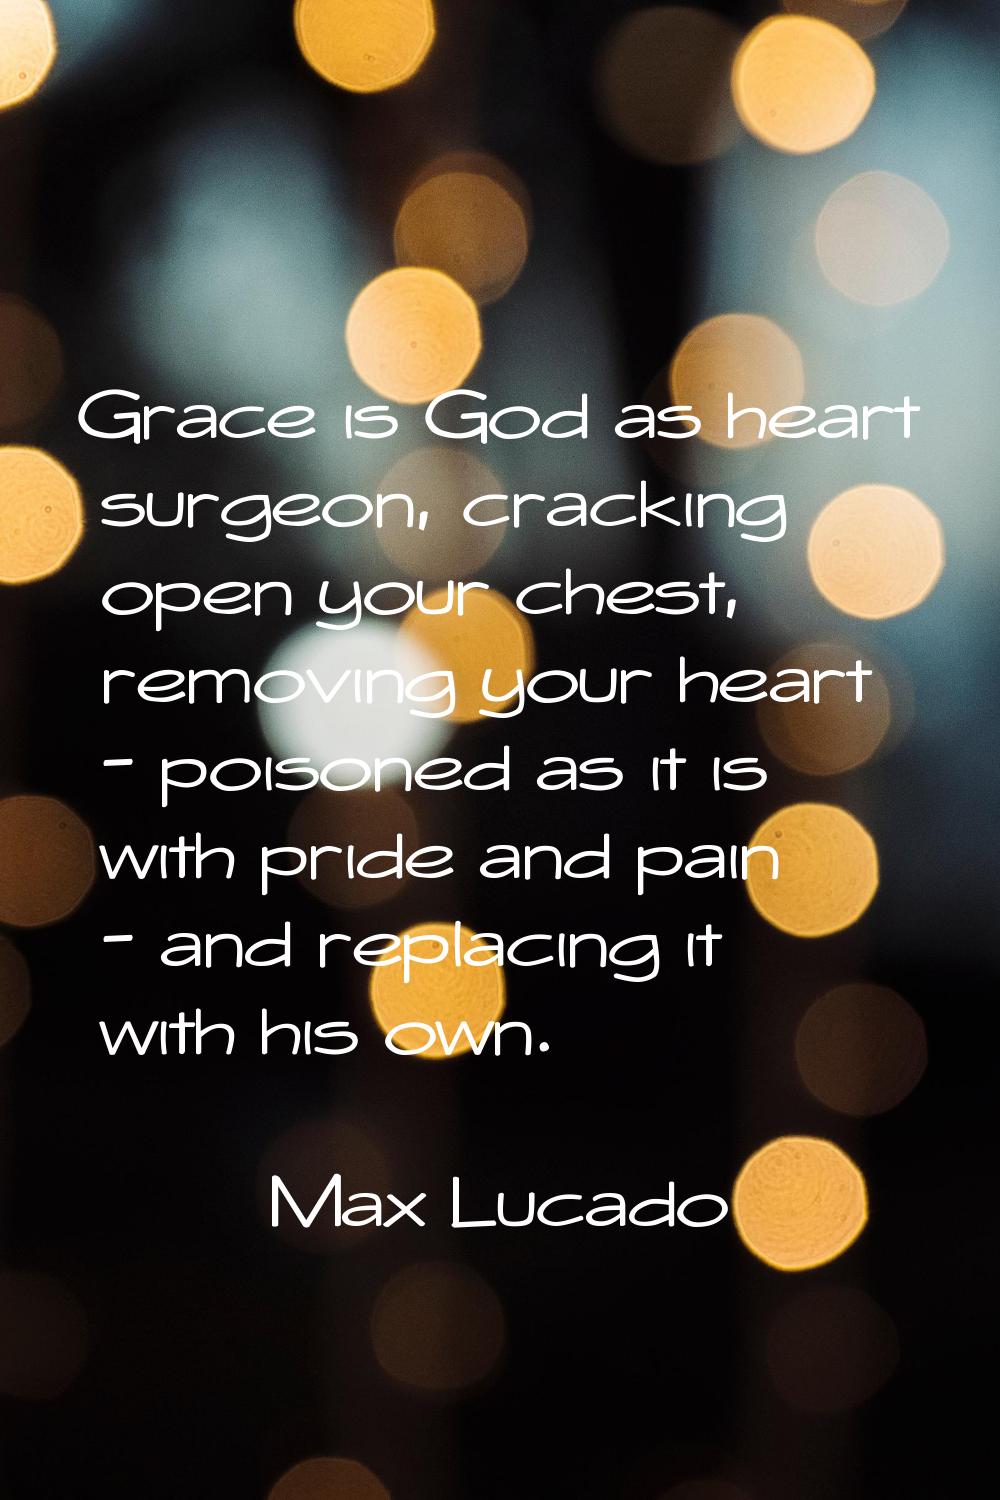 Grace is God as heart surgeon, cracking open your chest, removing your heart - poisoned as it is wi